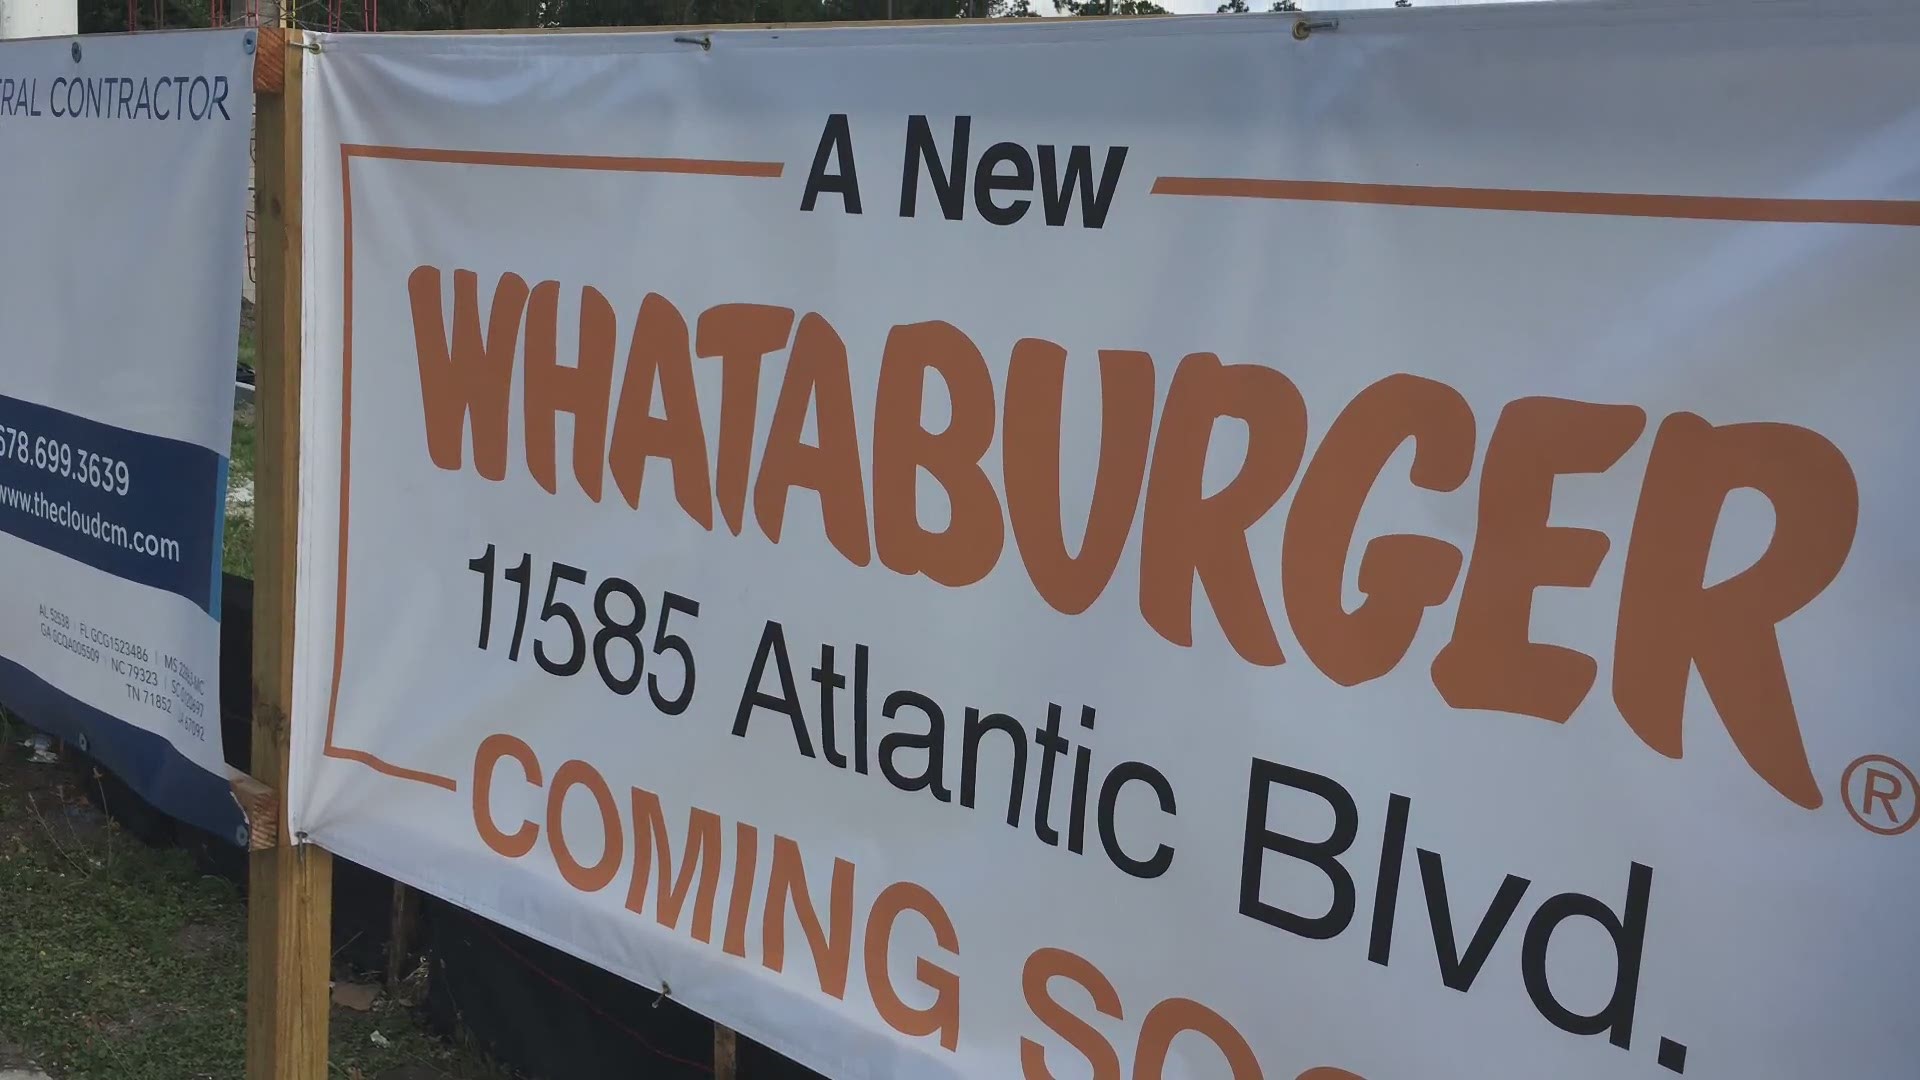 Whataburger is planning to open a new location in front of the 14-screen Cinemark movie theater under construction in the Atlantic North shopping center.
Credit: Harold Goodridge